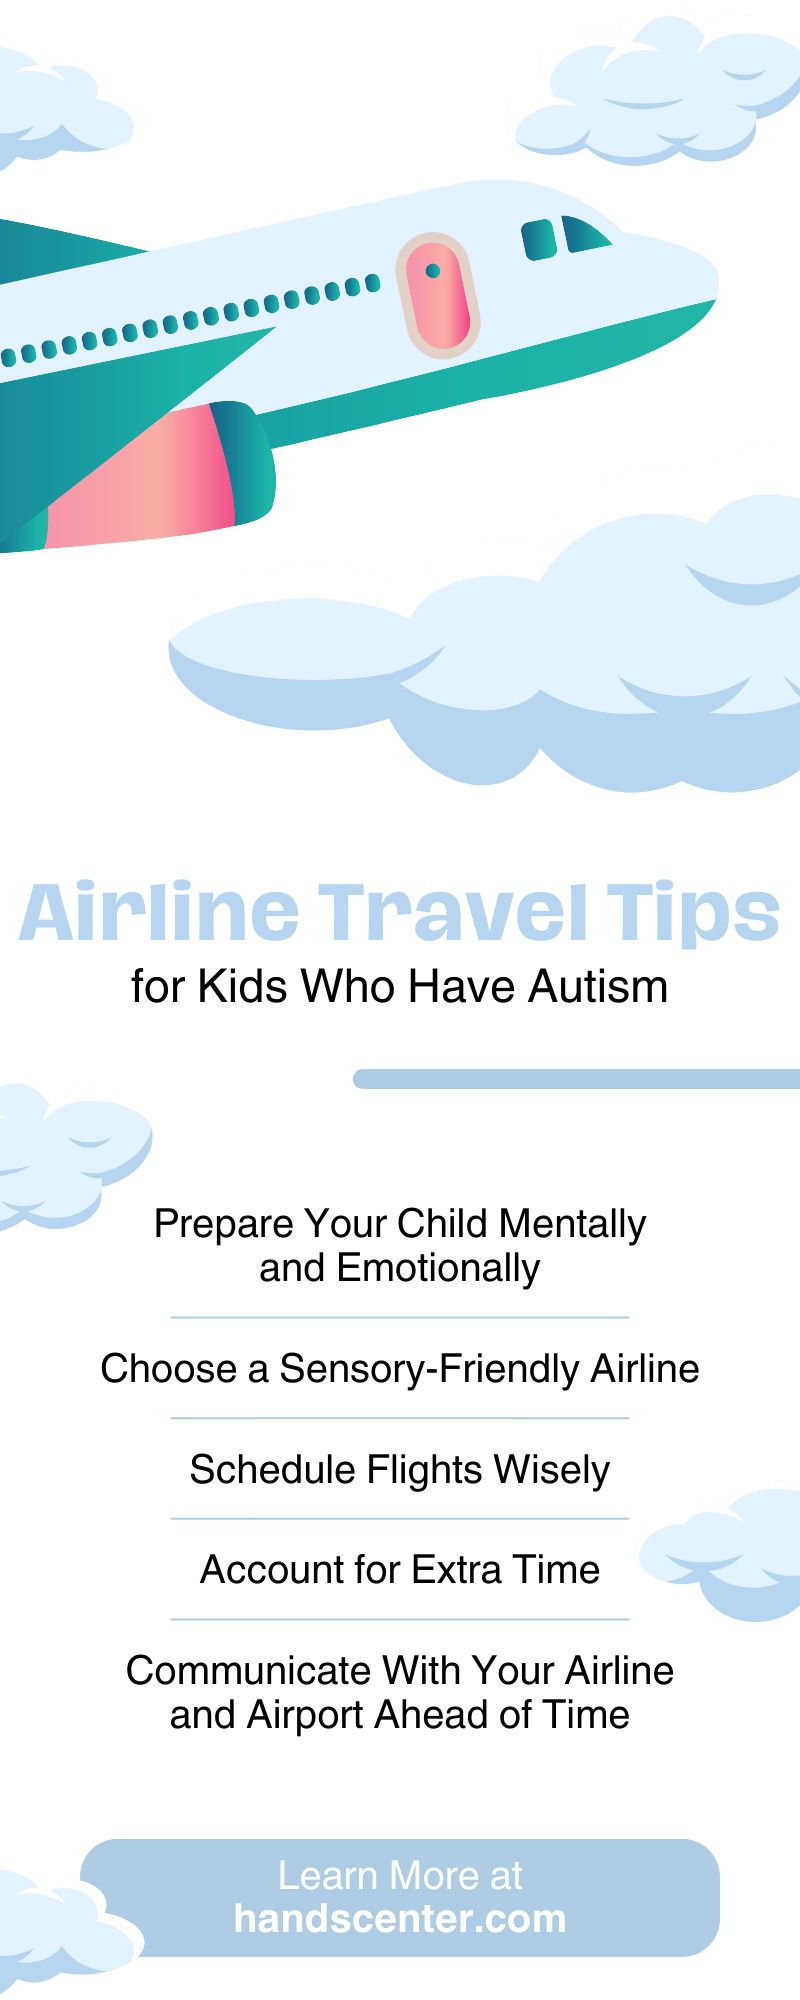 8 Airline Travel Tips for Kids Who Have Autism